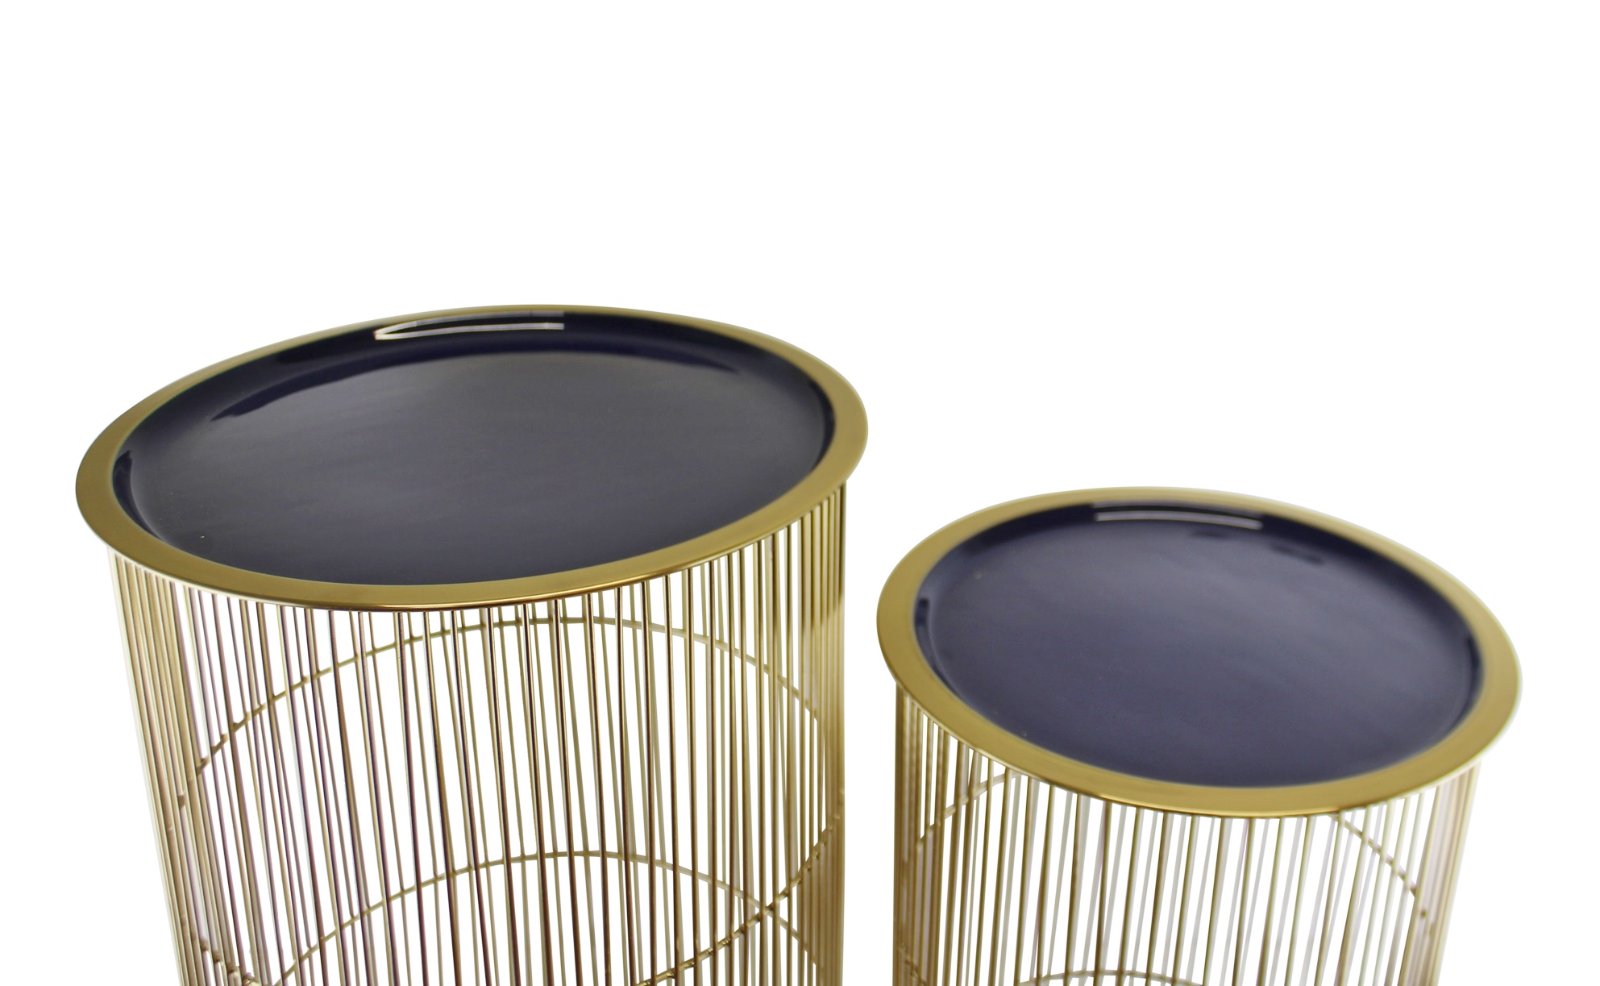 Set of 2 Decorative Side Tables in Gold & Navy Blue